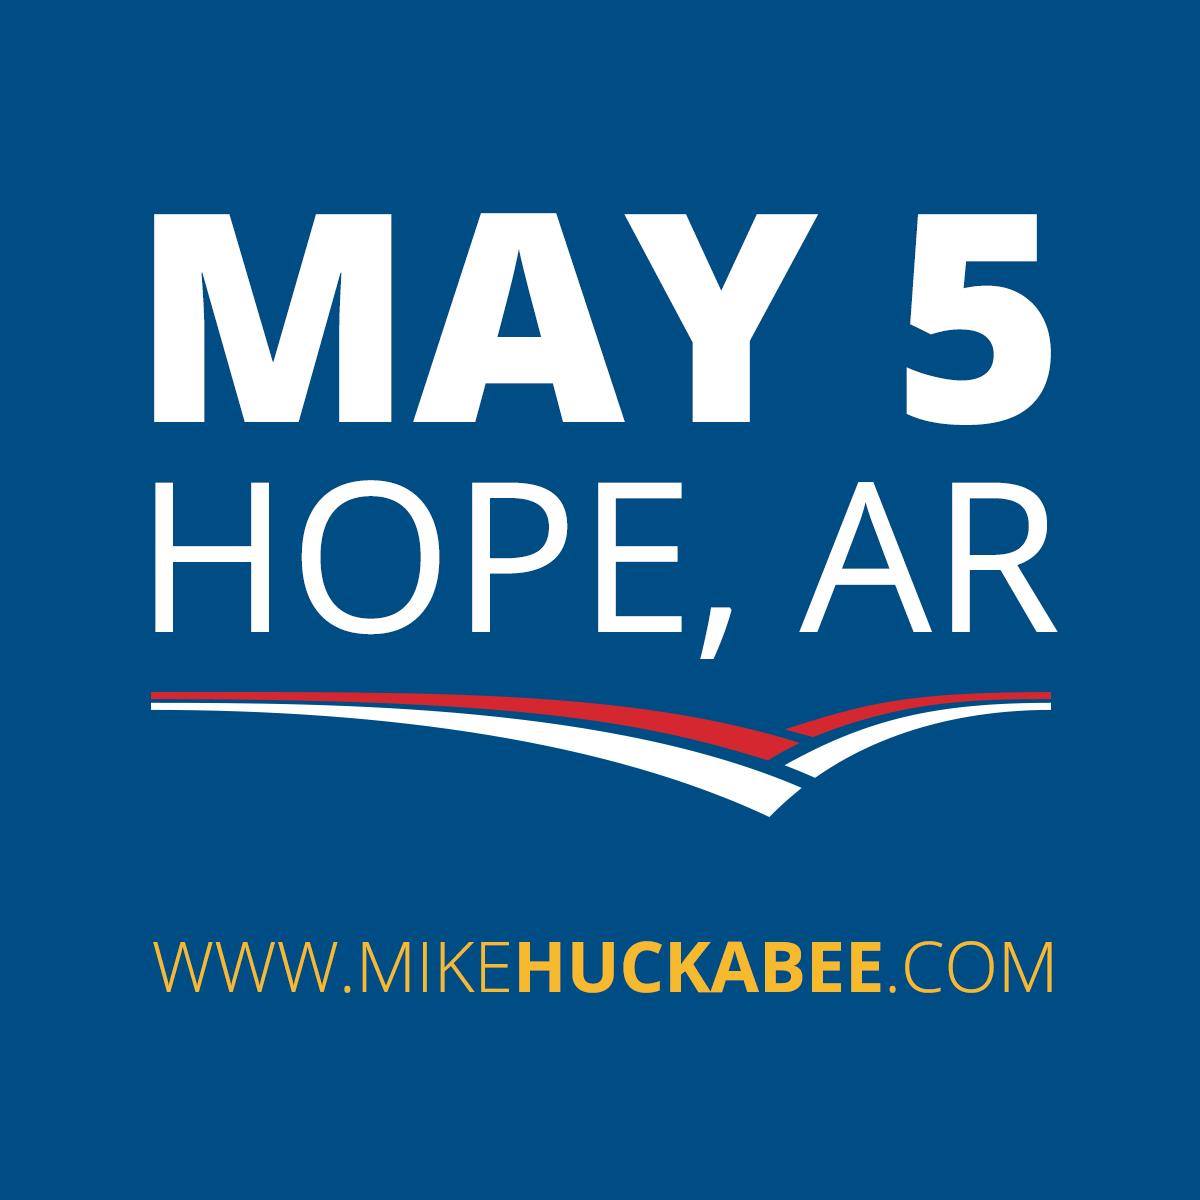 graphic for mike huckabee announcement in hope on may 5, 2015